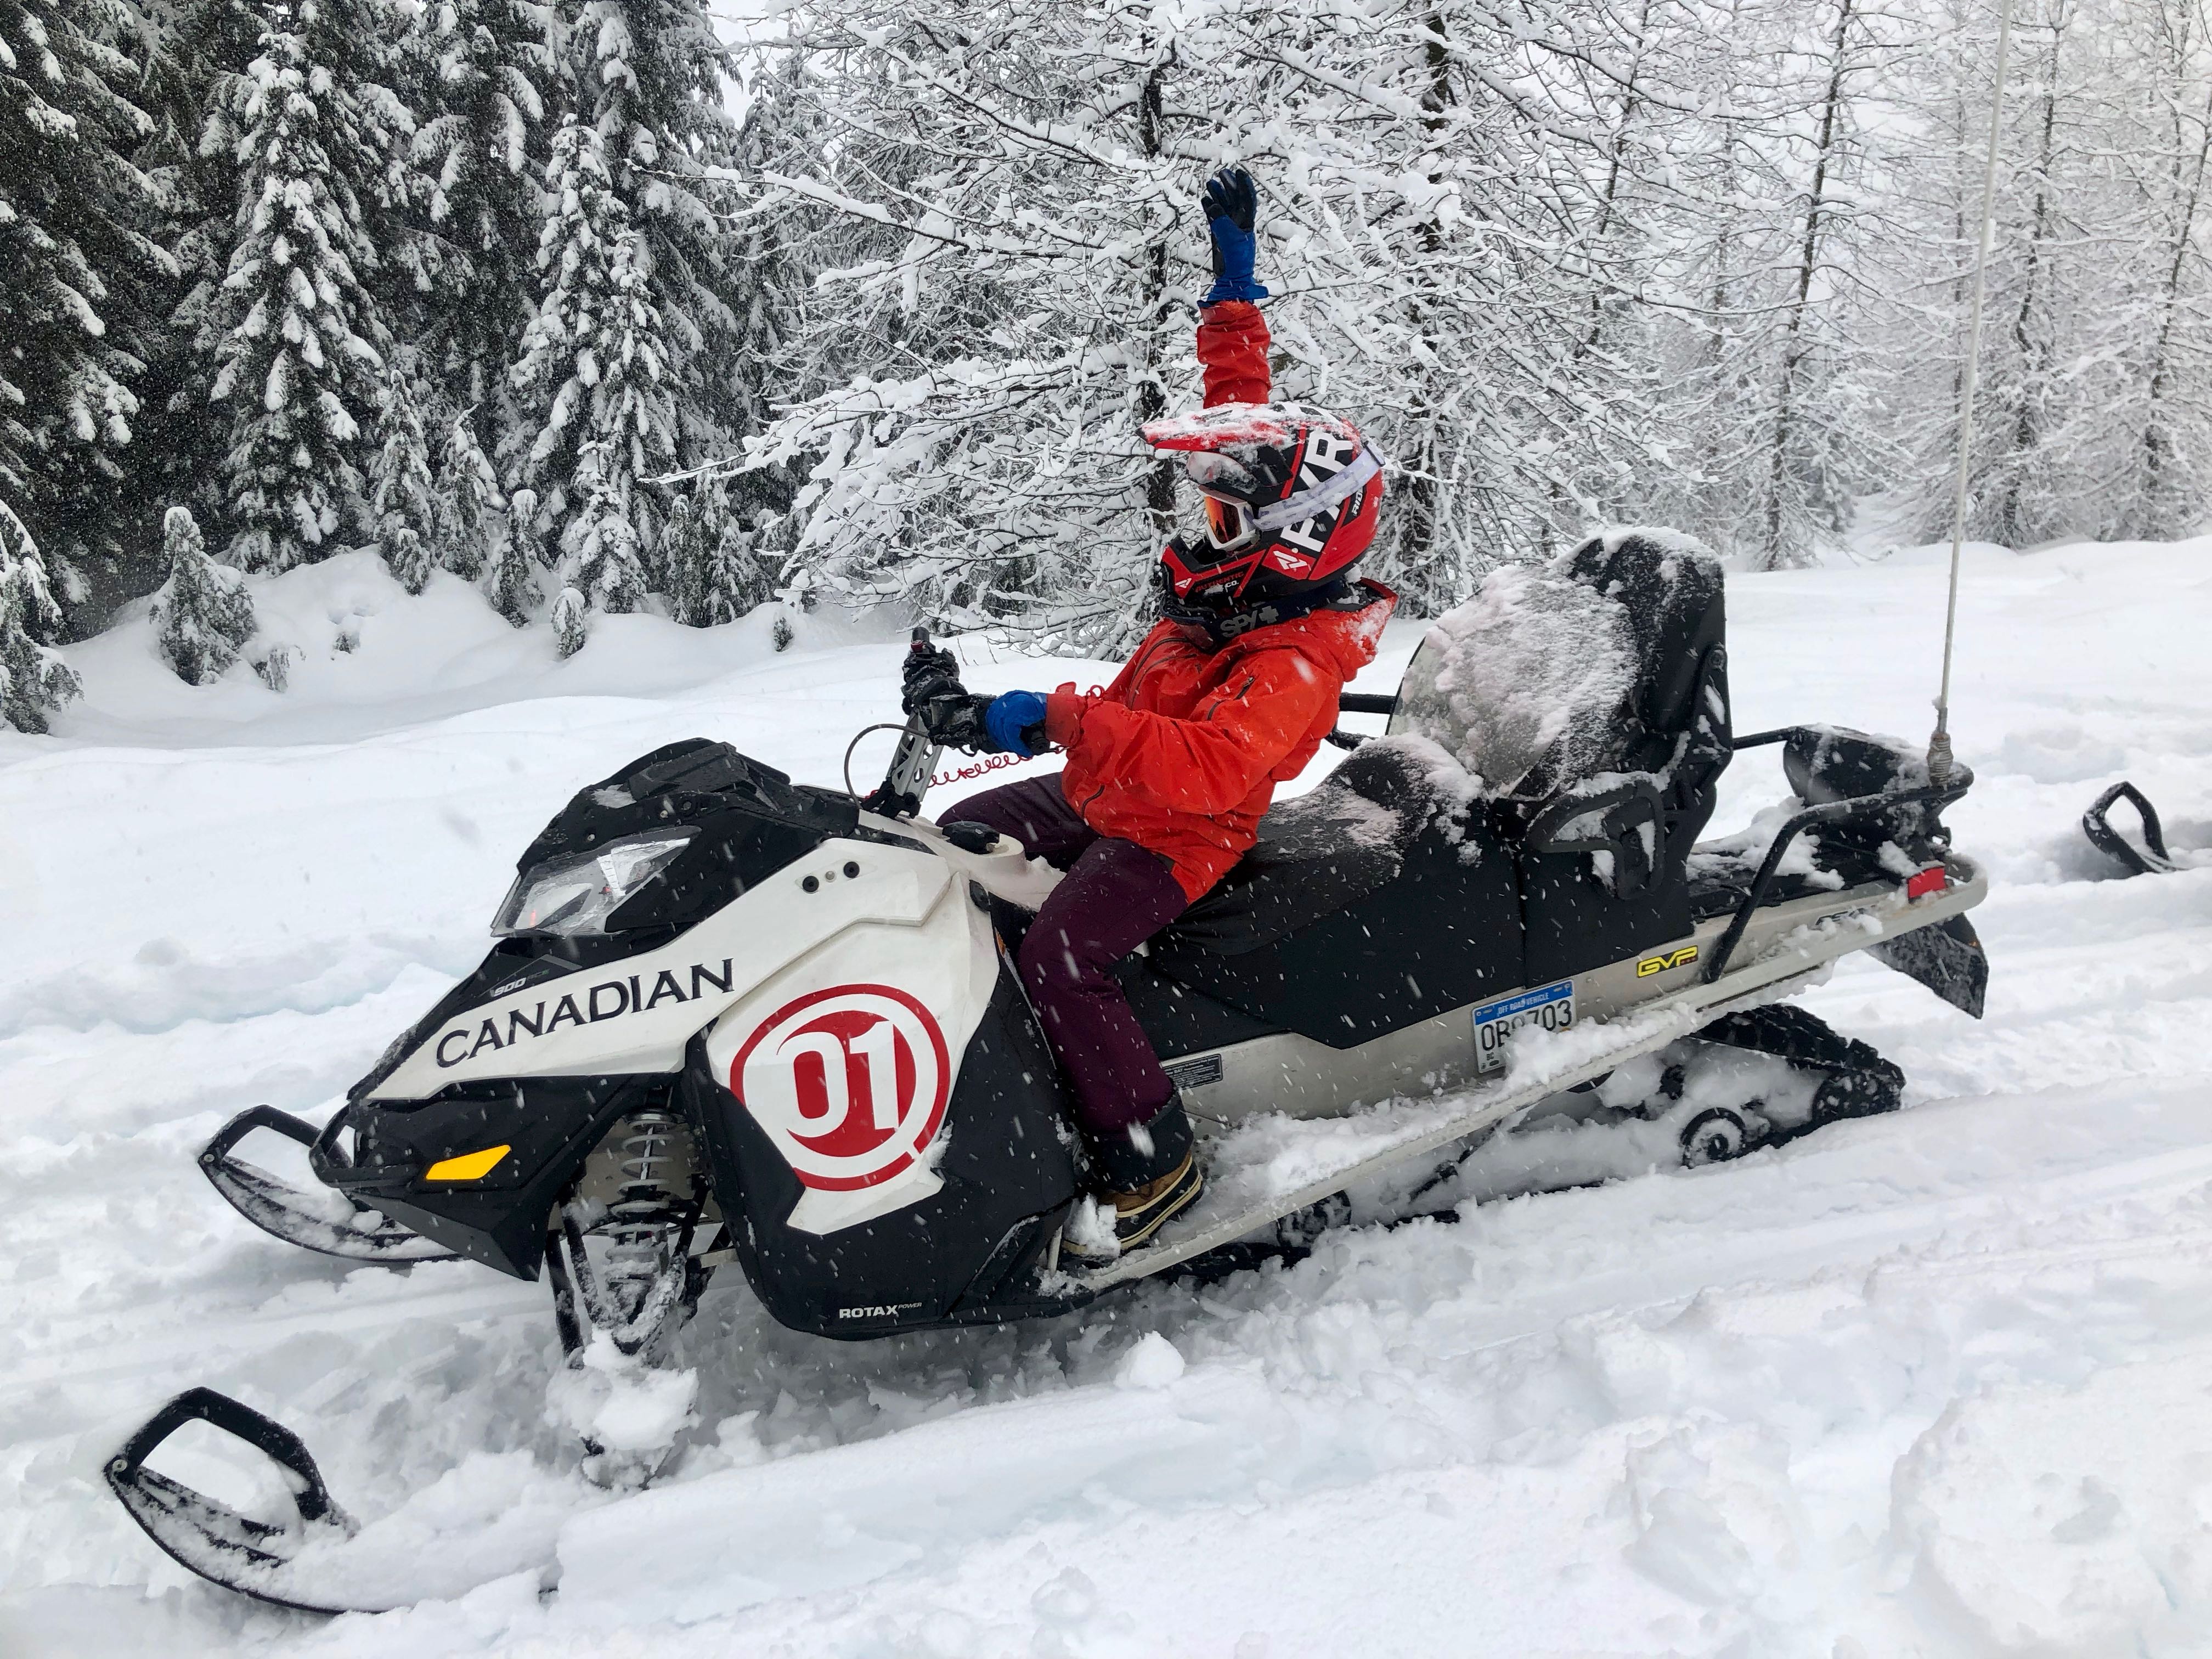 Me on a snowmobile